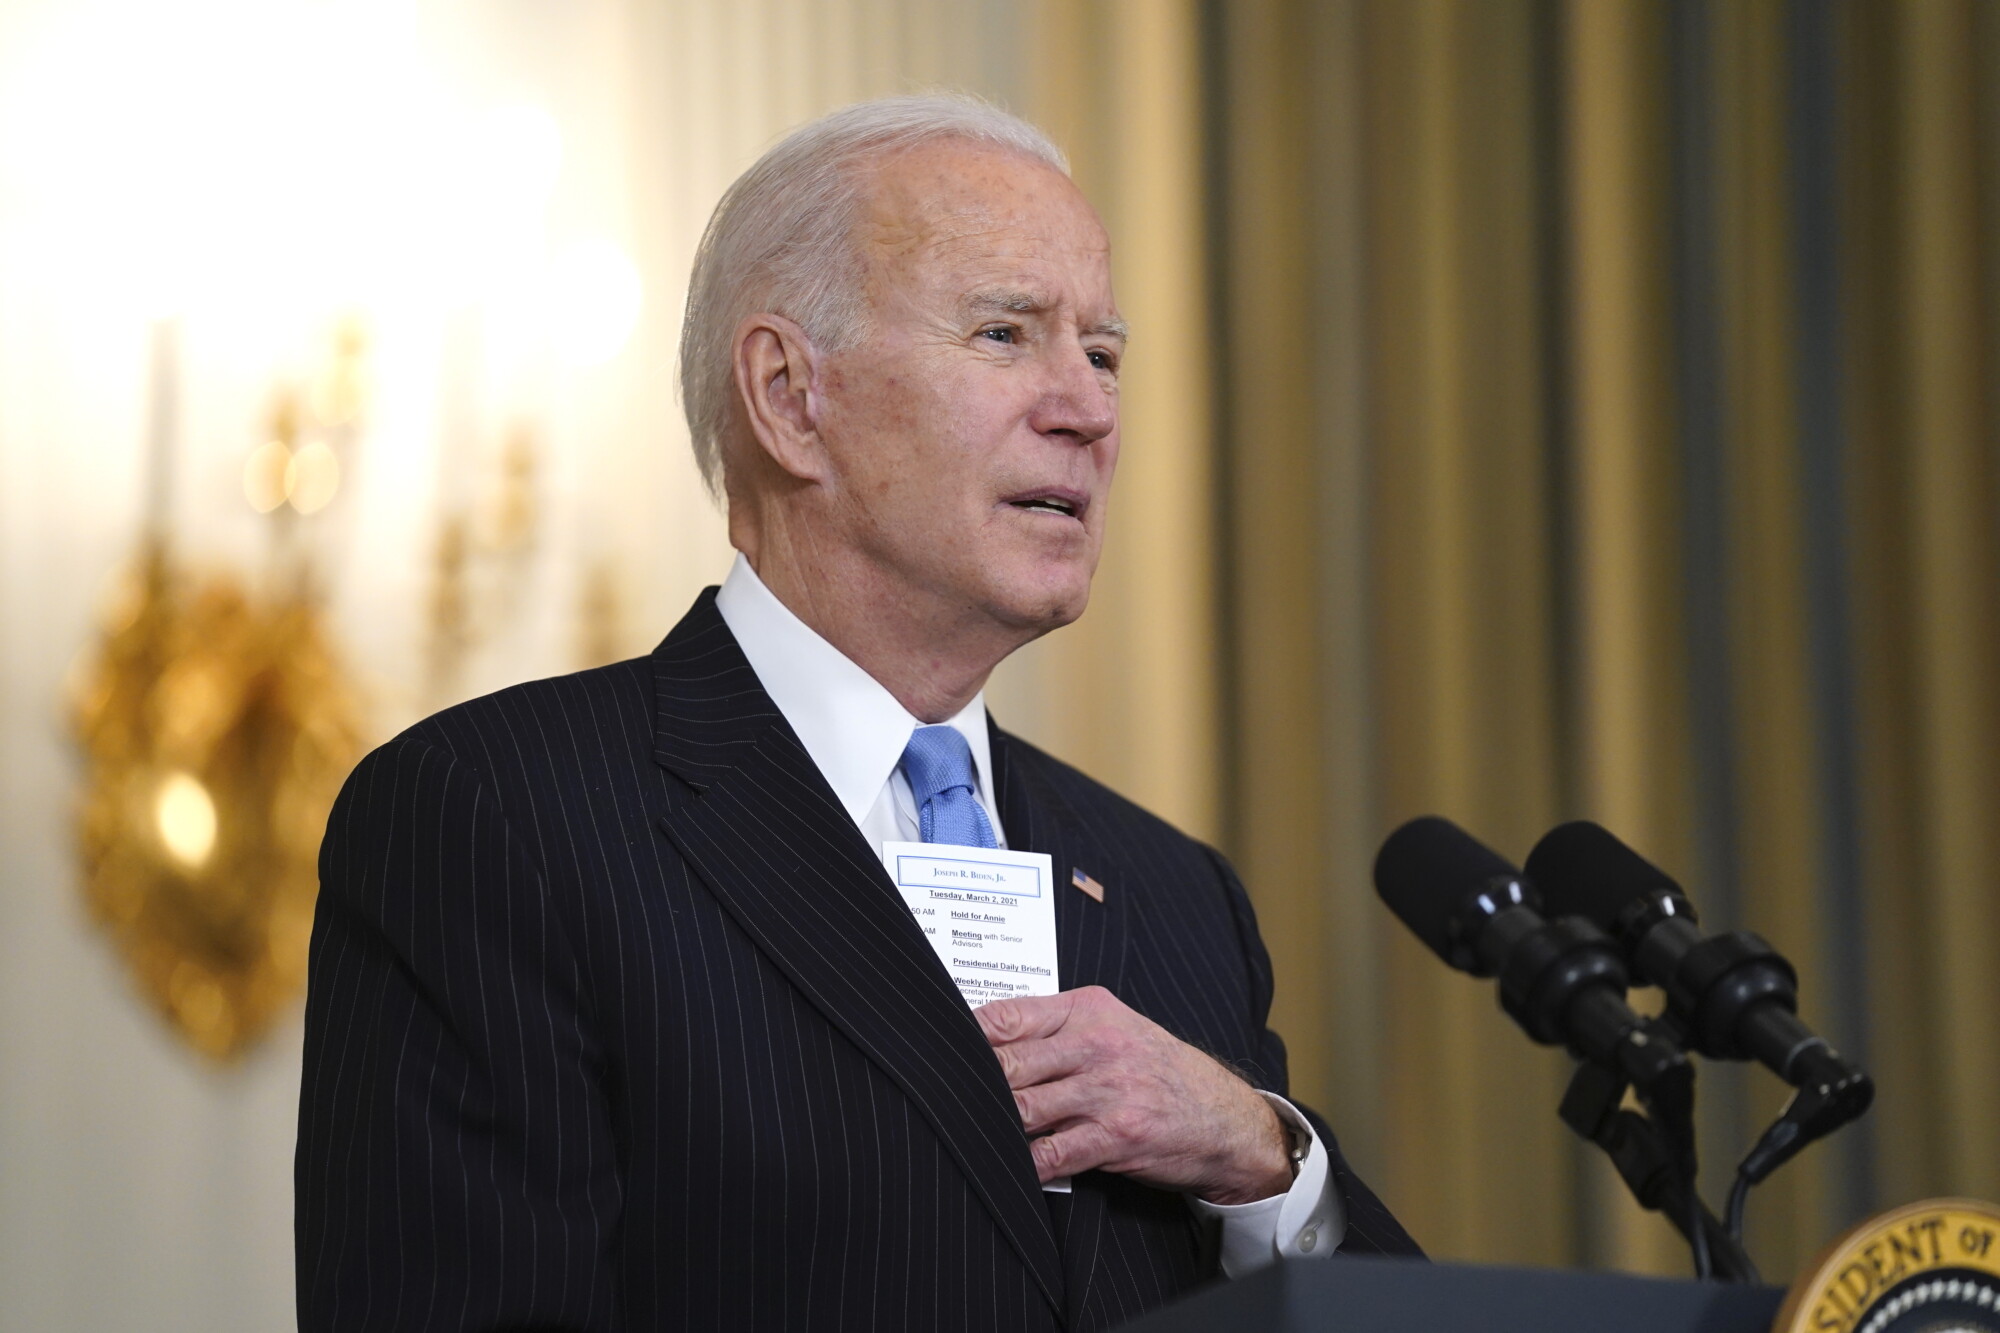 Biden Says Country ‘On Track’ to Have Enough Vaccines for All Adult Americans by End of May